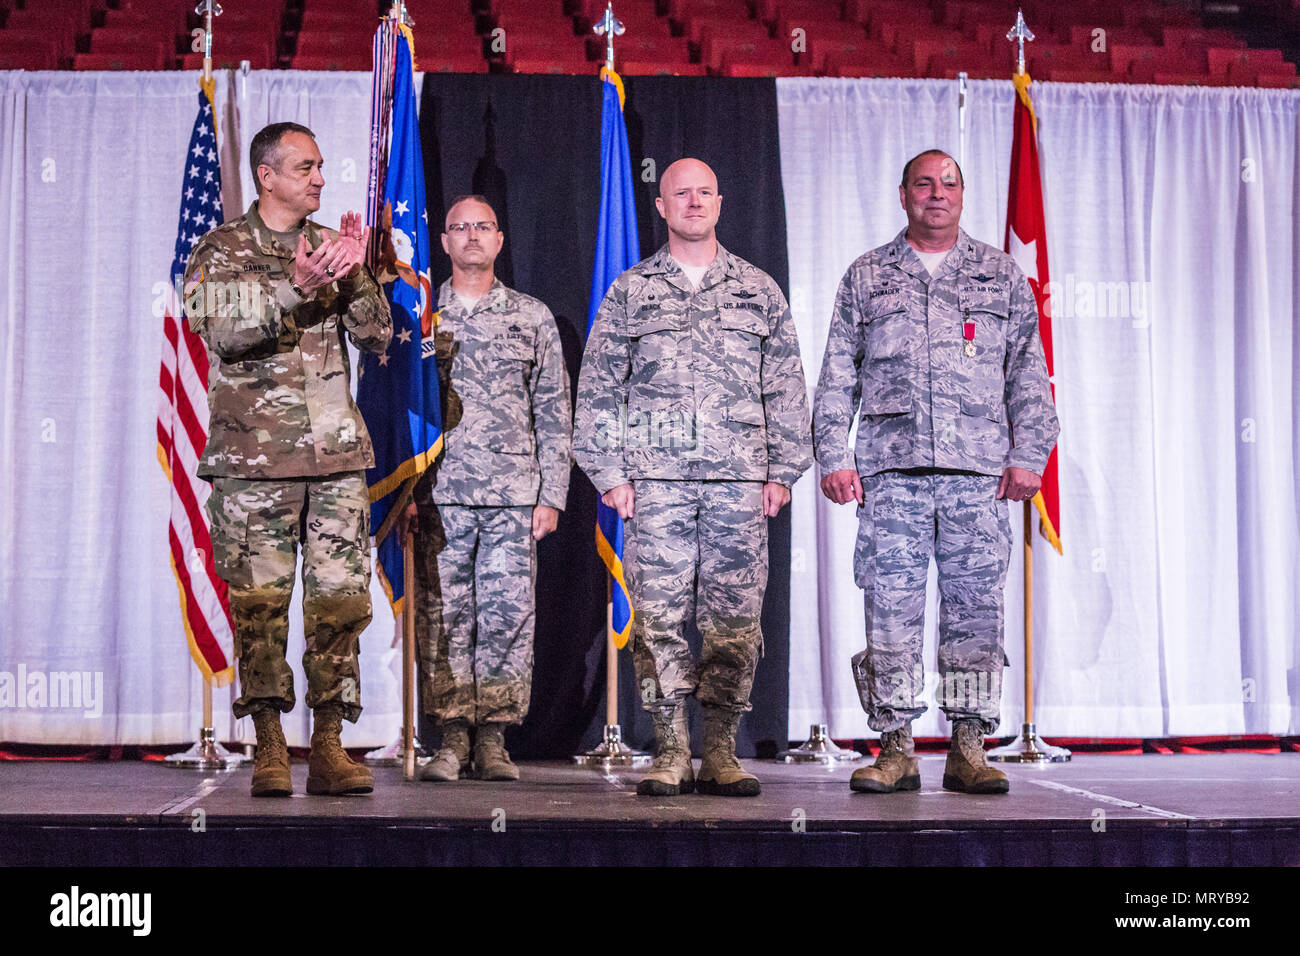 U.S. Air Force Col. Ed Black (center) takes command of the 139th Airlift Wing, Missouri Air National Guard, from Col. Ralph Schwader (right), during a change of command ceremony at the St. Joseph Civic Arena, St. Joseph, Mo. July 8, 2017. Col. Schwader will be assigned to Missouri Air National Guard Headquarters in Jefferson City, after more than 3 years commanding the 139th. (U.S. Air National Guard photo by Staff Sgt. Patrick P. Evenson) Stock Photo